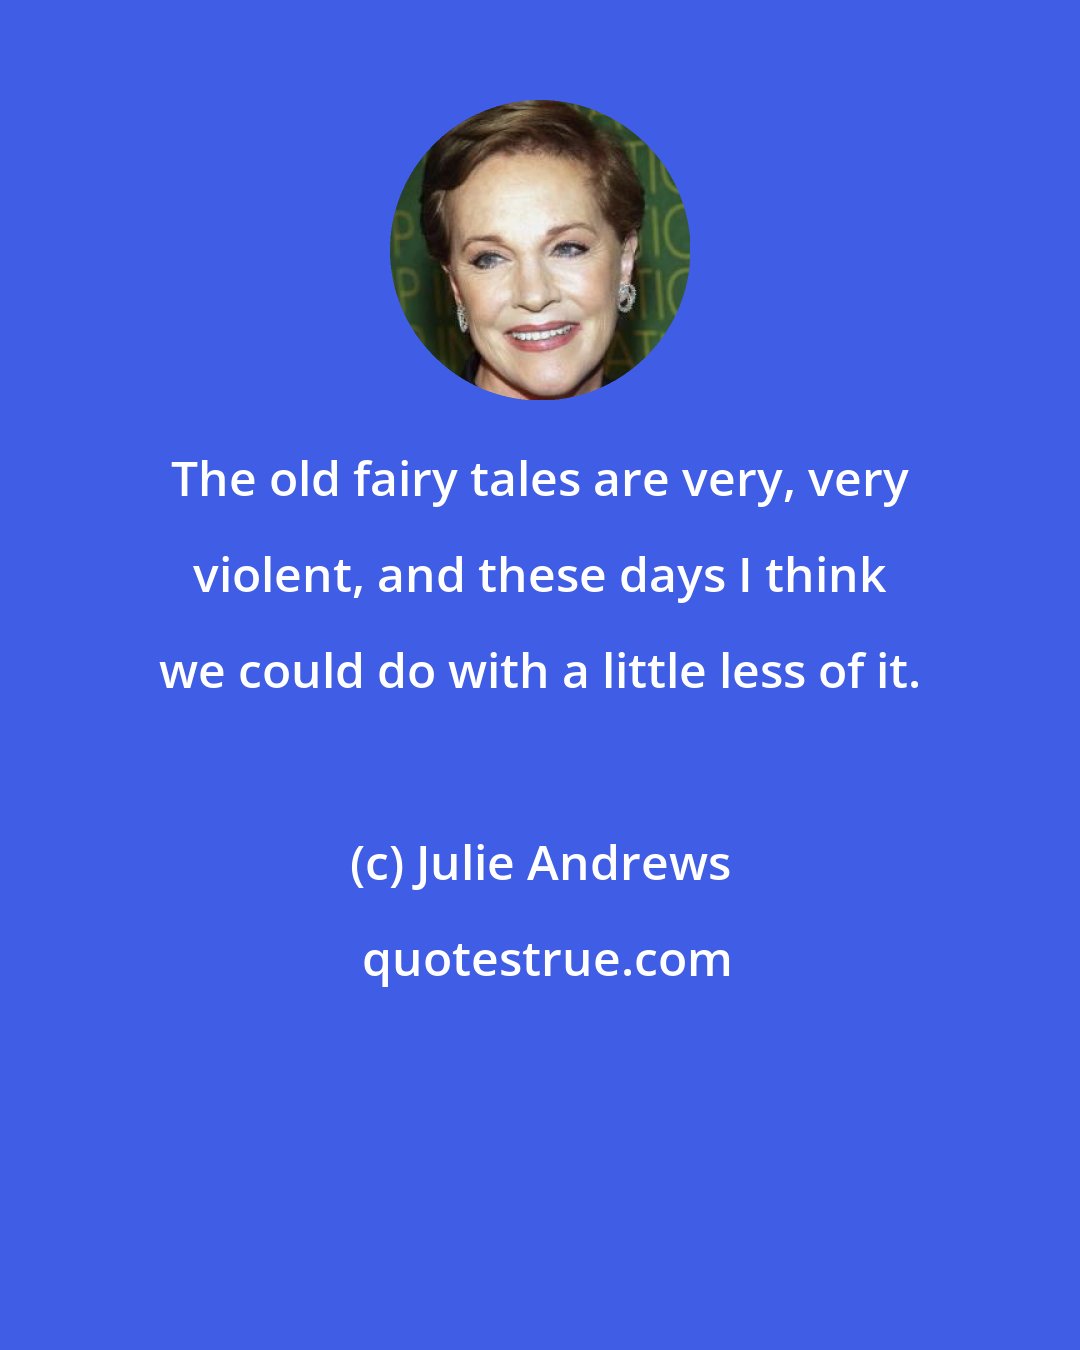 Julie Andrews: The old fairy tales are very, very violent, and these days I think we could do with a little less of it.